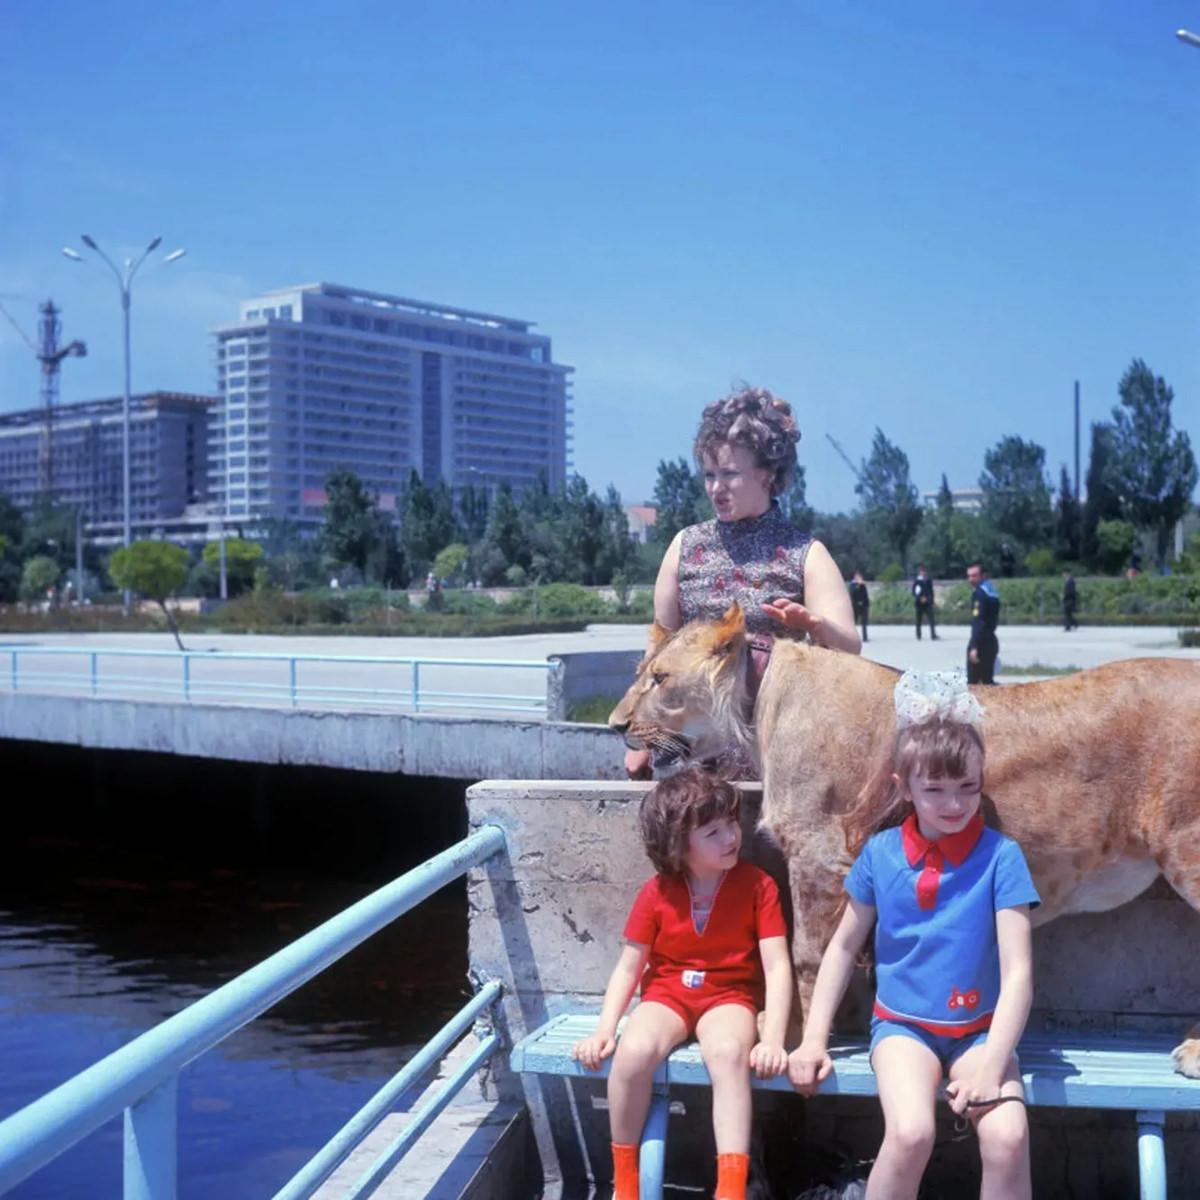 The Tragic Story of a Soviet Family Who Raised Lions as their Pets in the 1970s